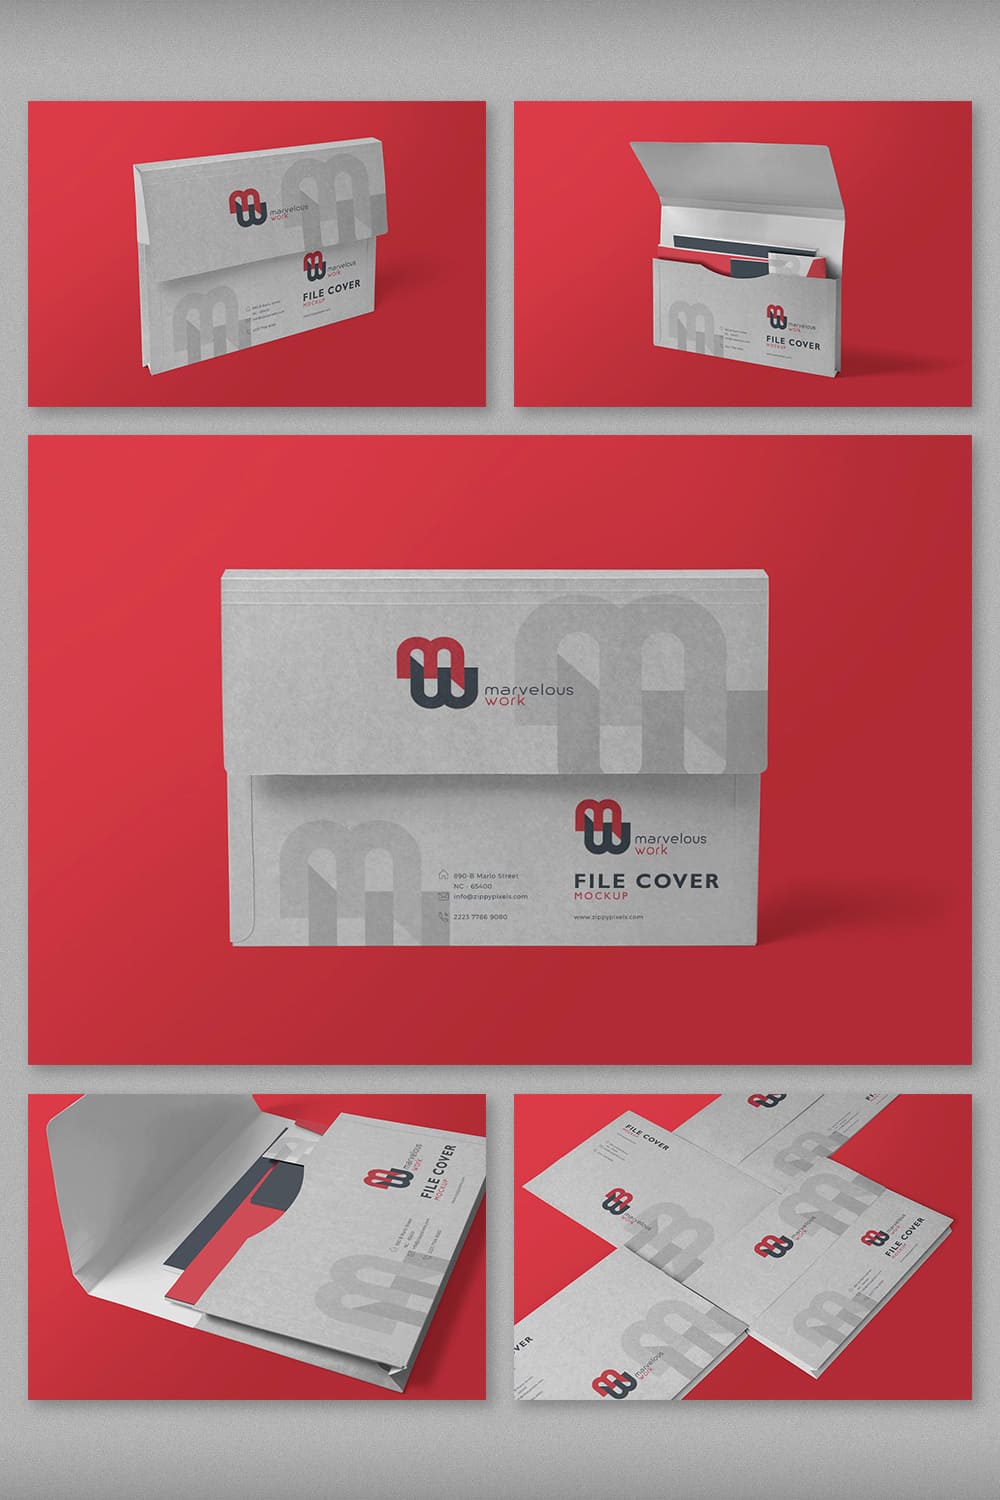 A selection of images of flap folder with a colorful exquisite design on a red background.